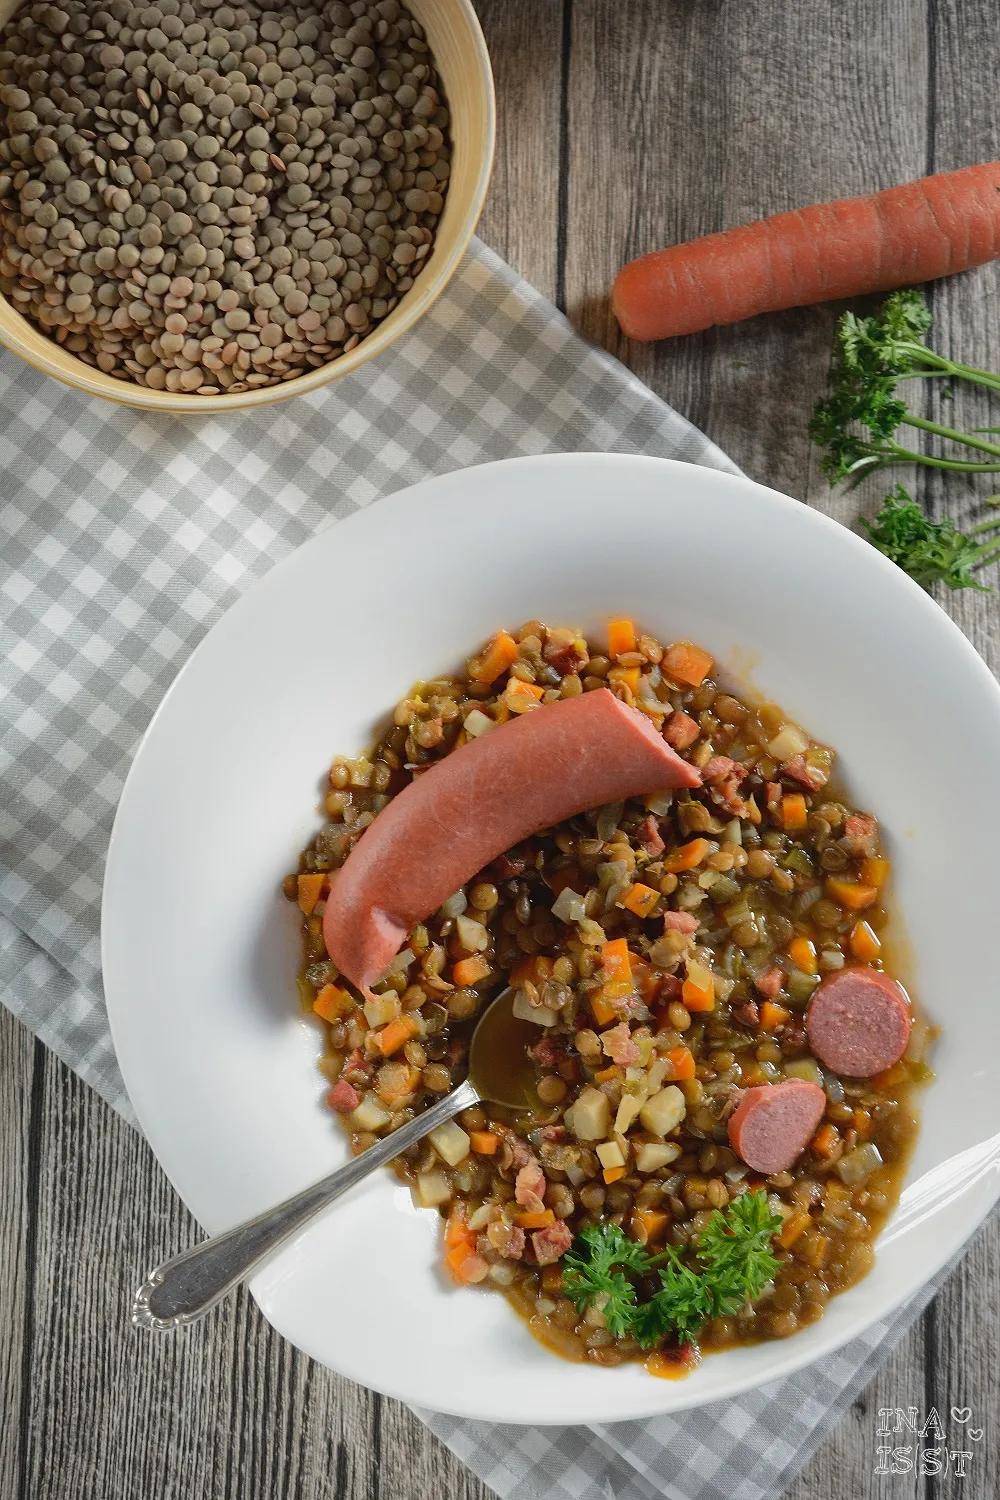 Ina Is(s)t: Einfache Linsensuppe mit Rindswurst / Easy peasy lentil ...